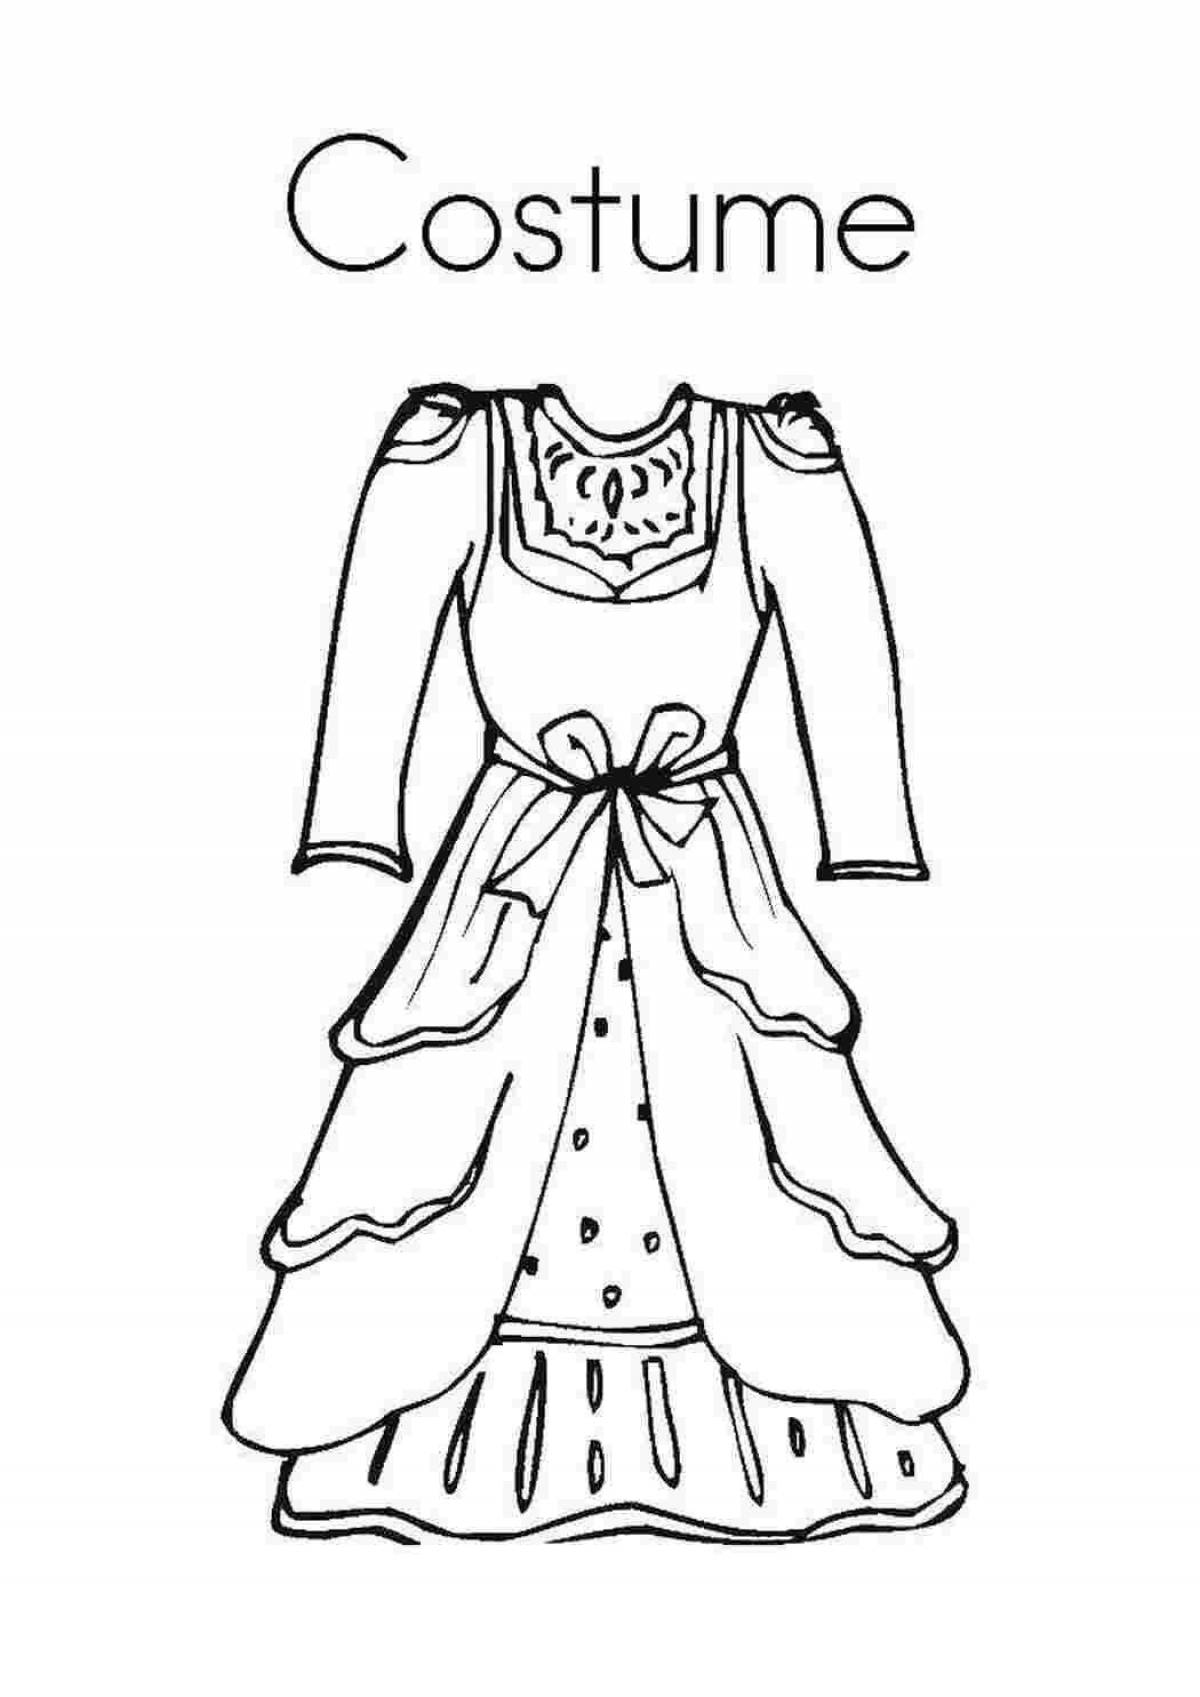 Playful dress coloring book for 5-6 year olds